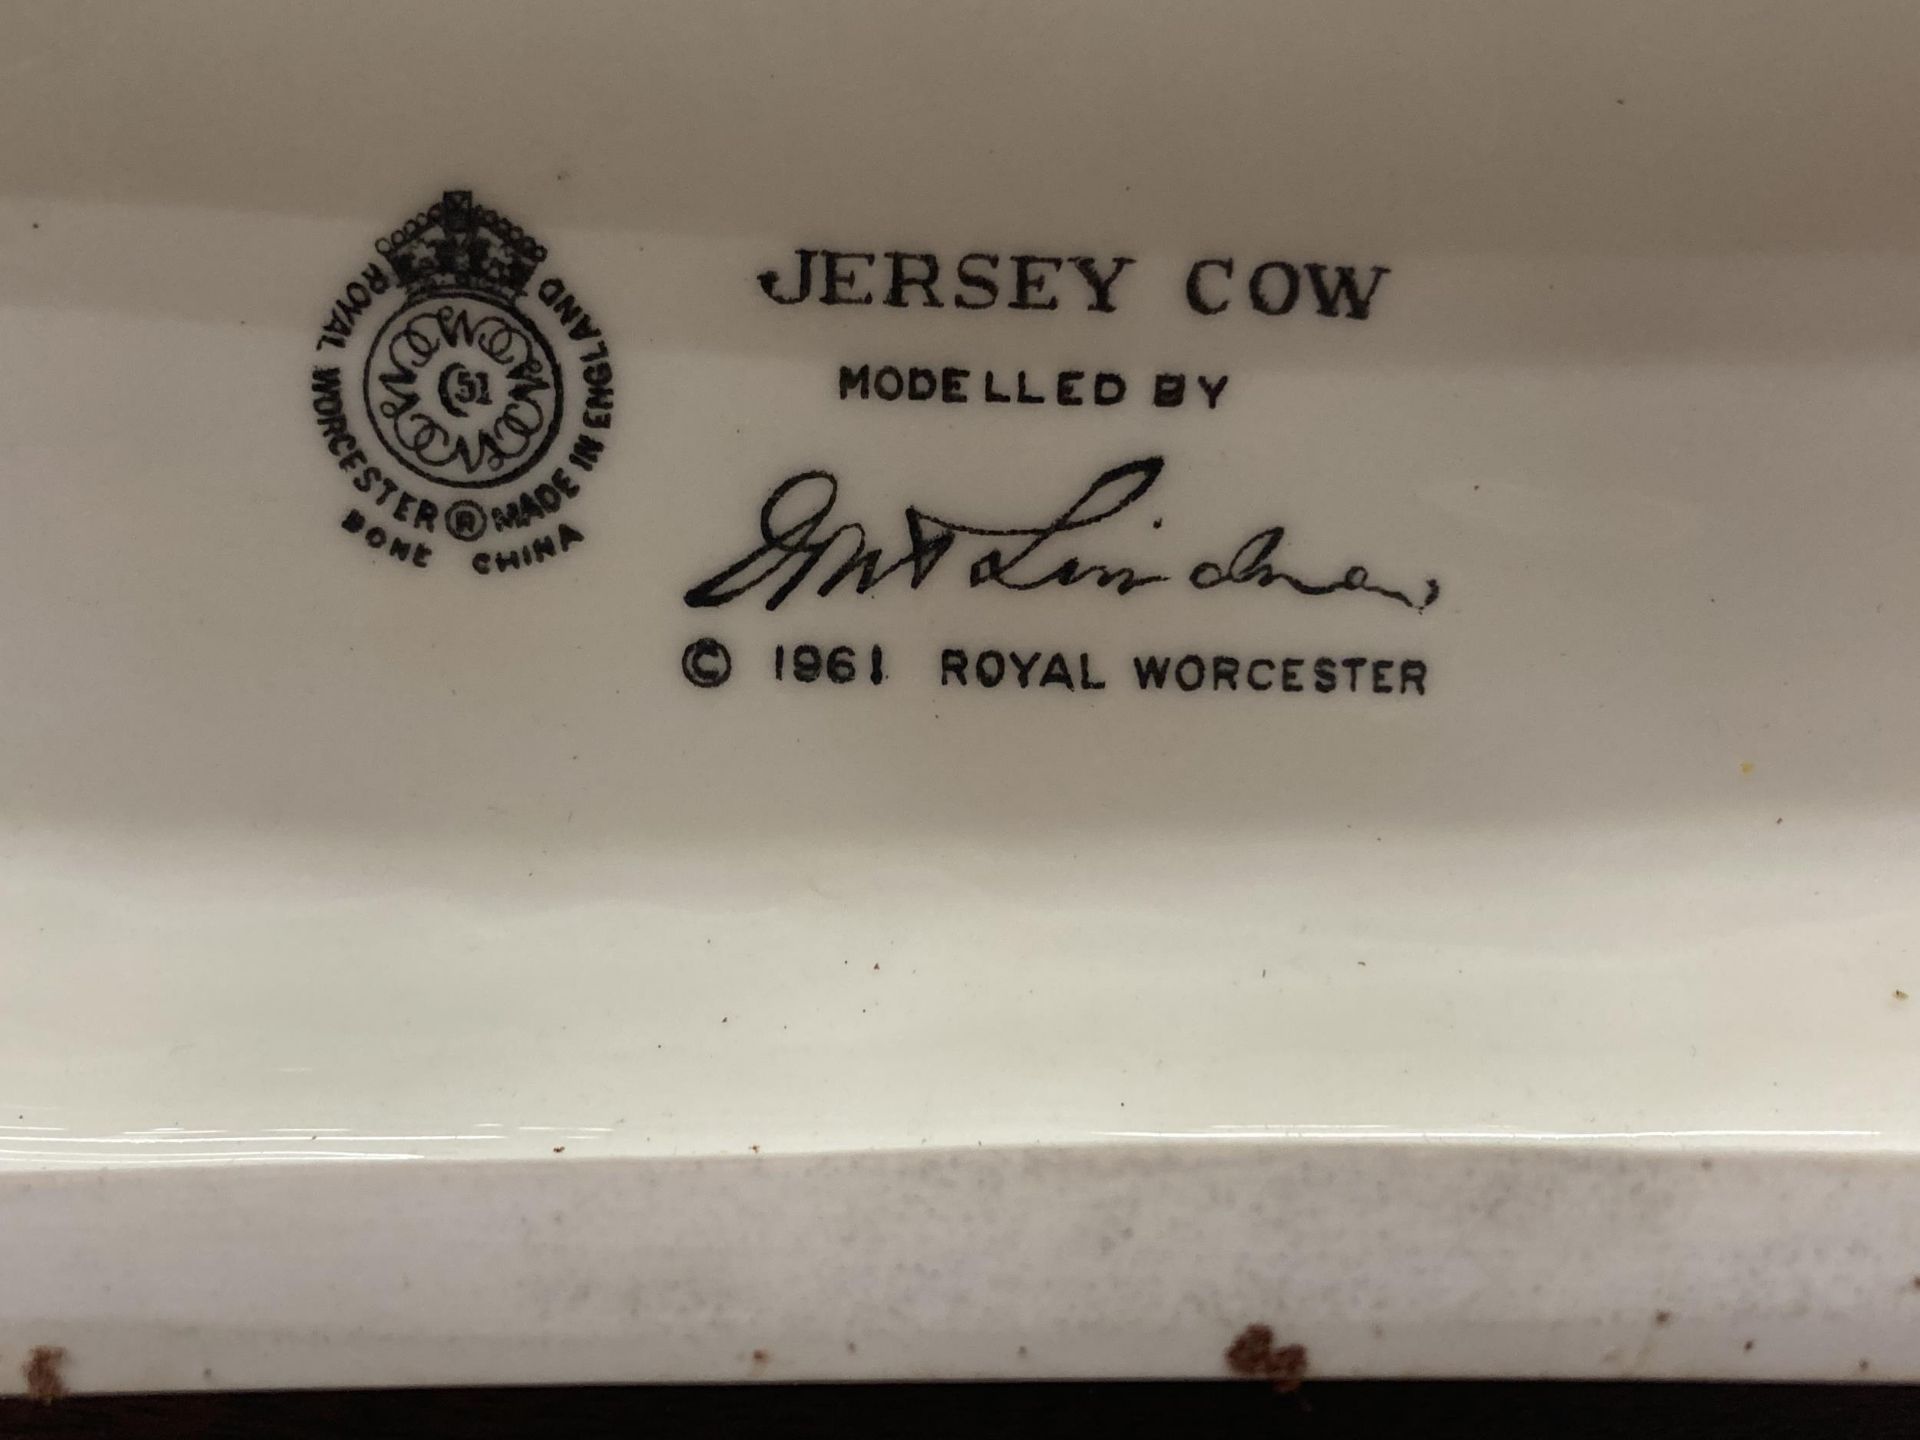 A ROYAL WORCESTER MODEL OF A JERSEY COW MODELLED BY DORIS LINDNER AND PRODUCED IN A LIMITED - Image 5 of 5